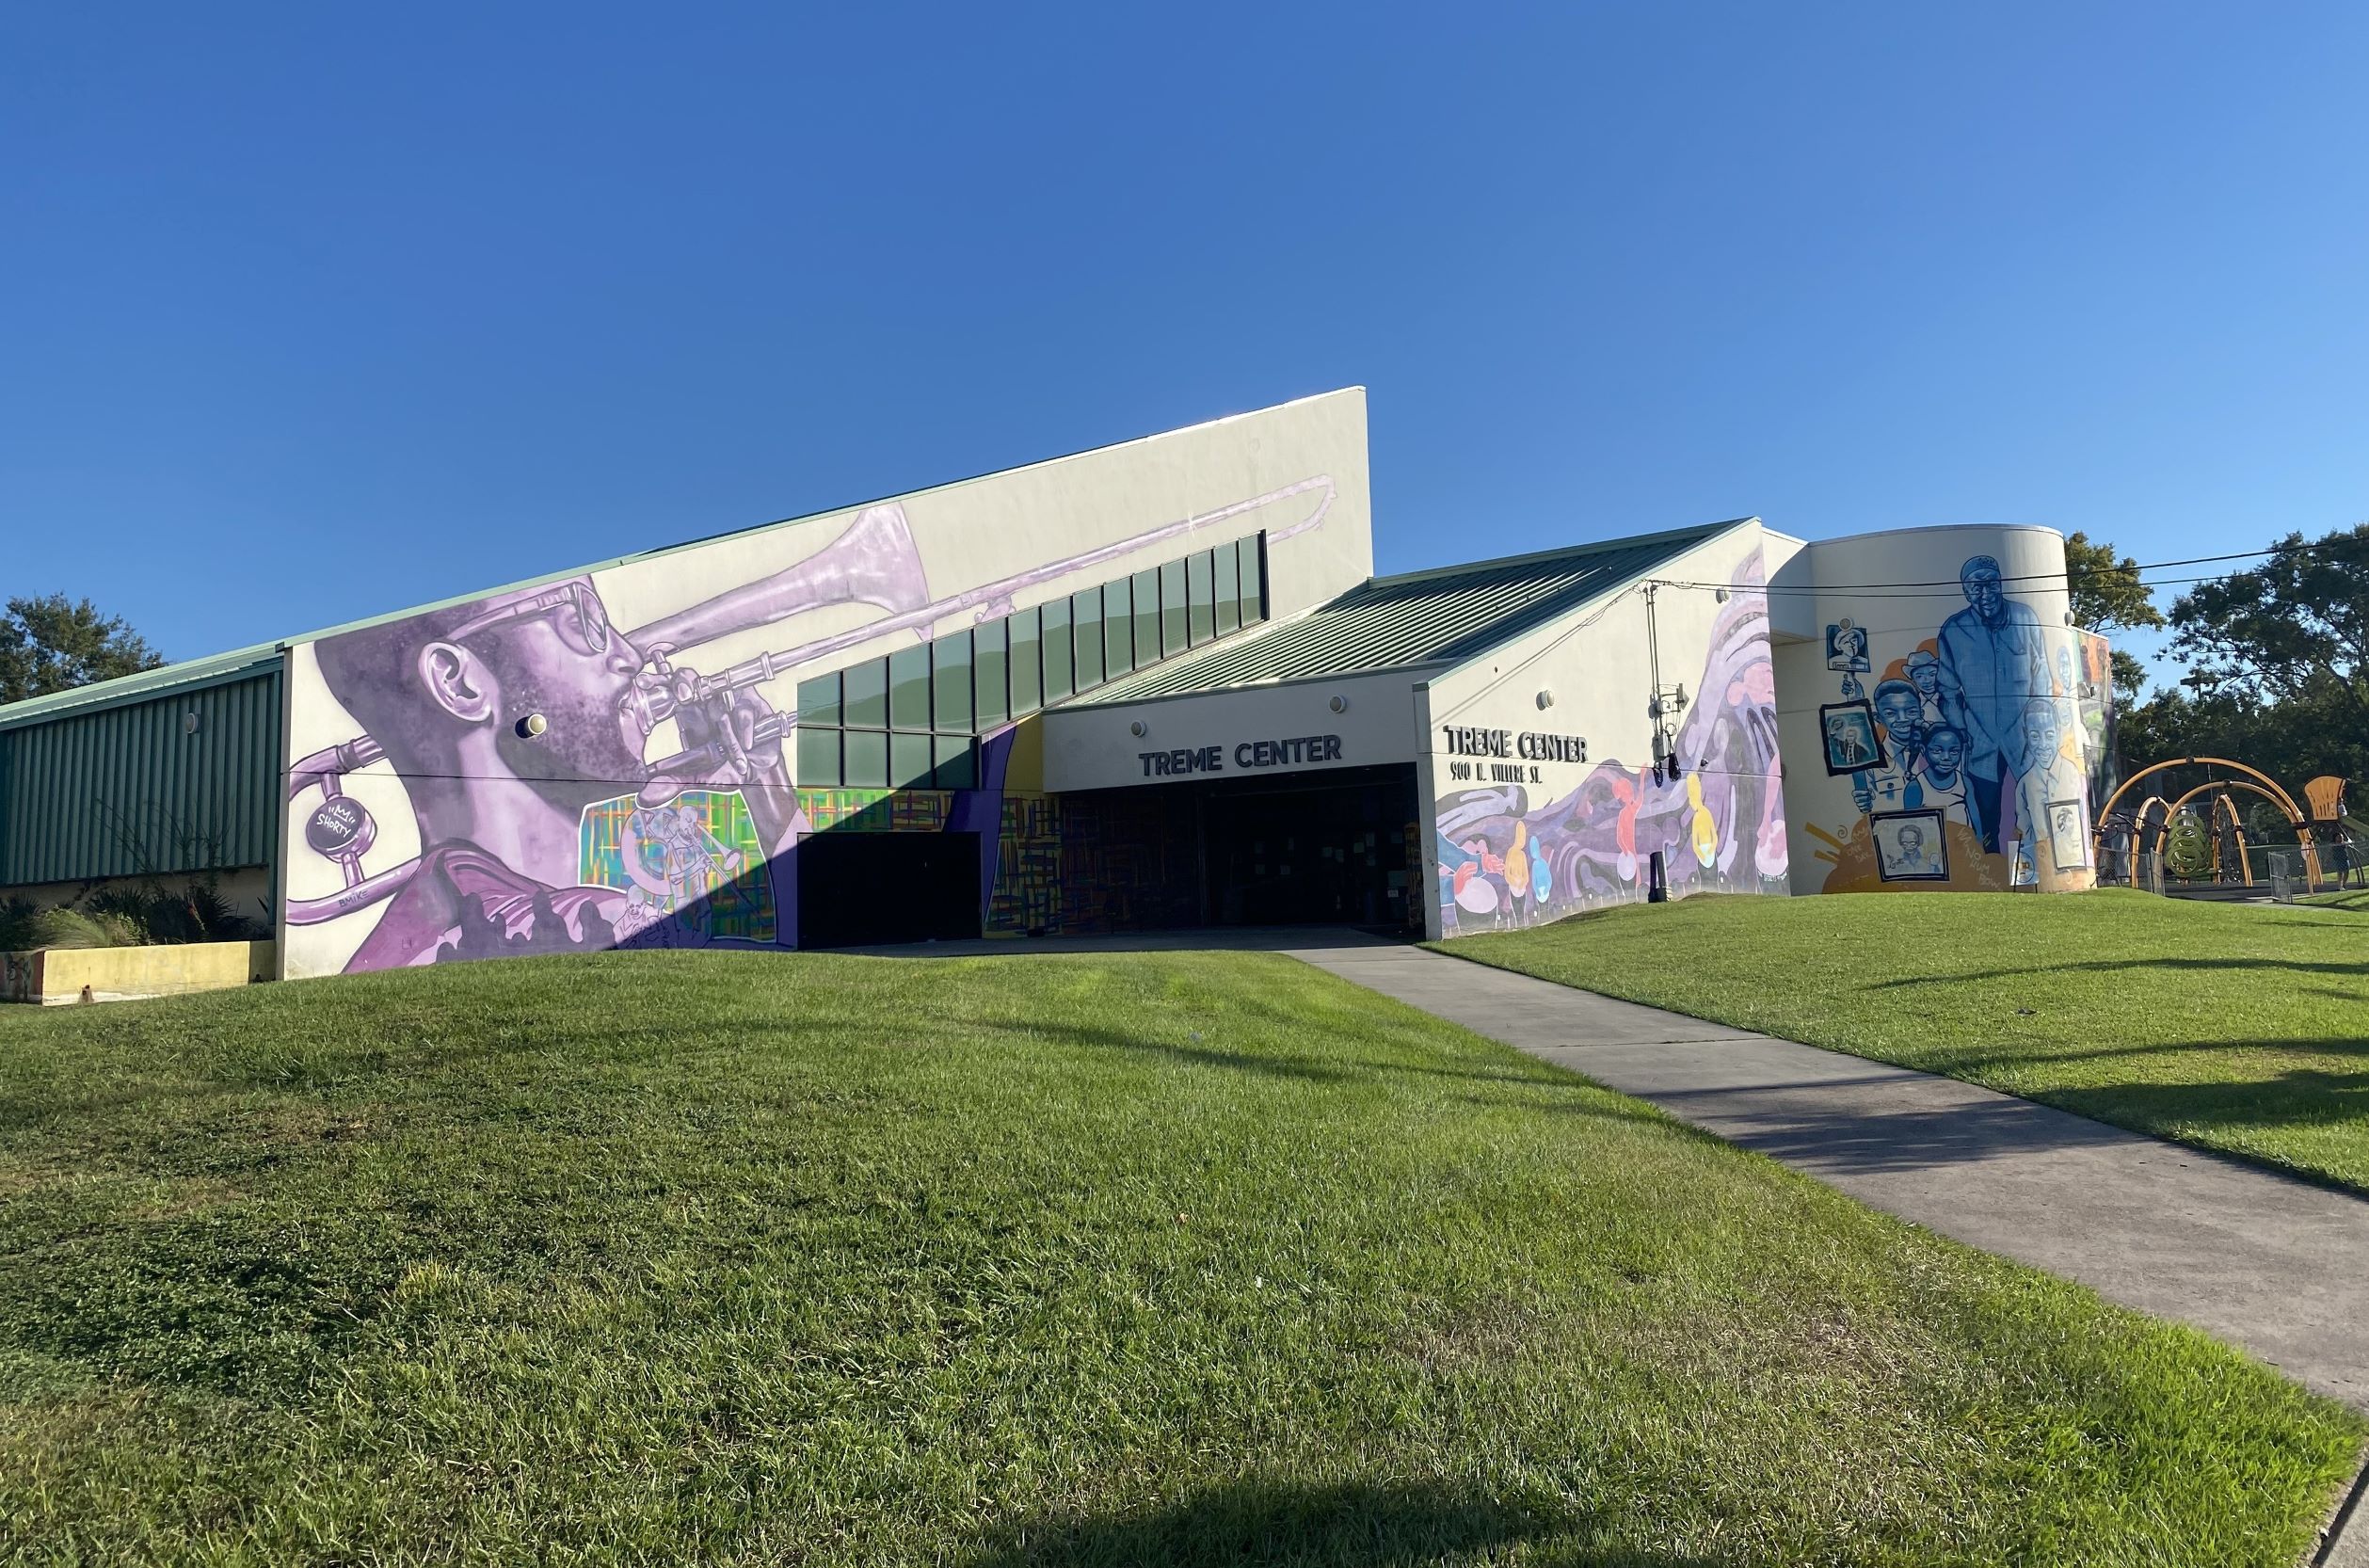 Community center with mural of jazz musician